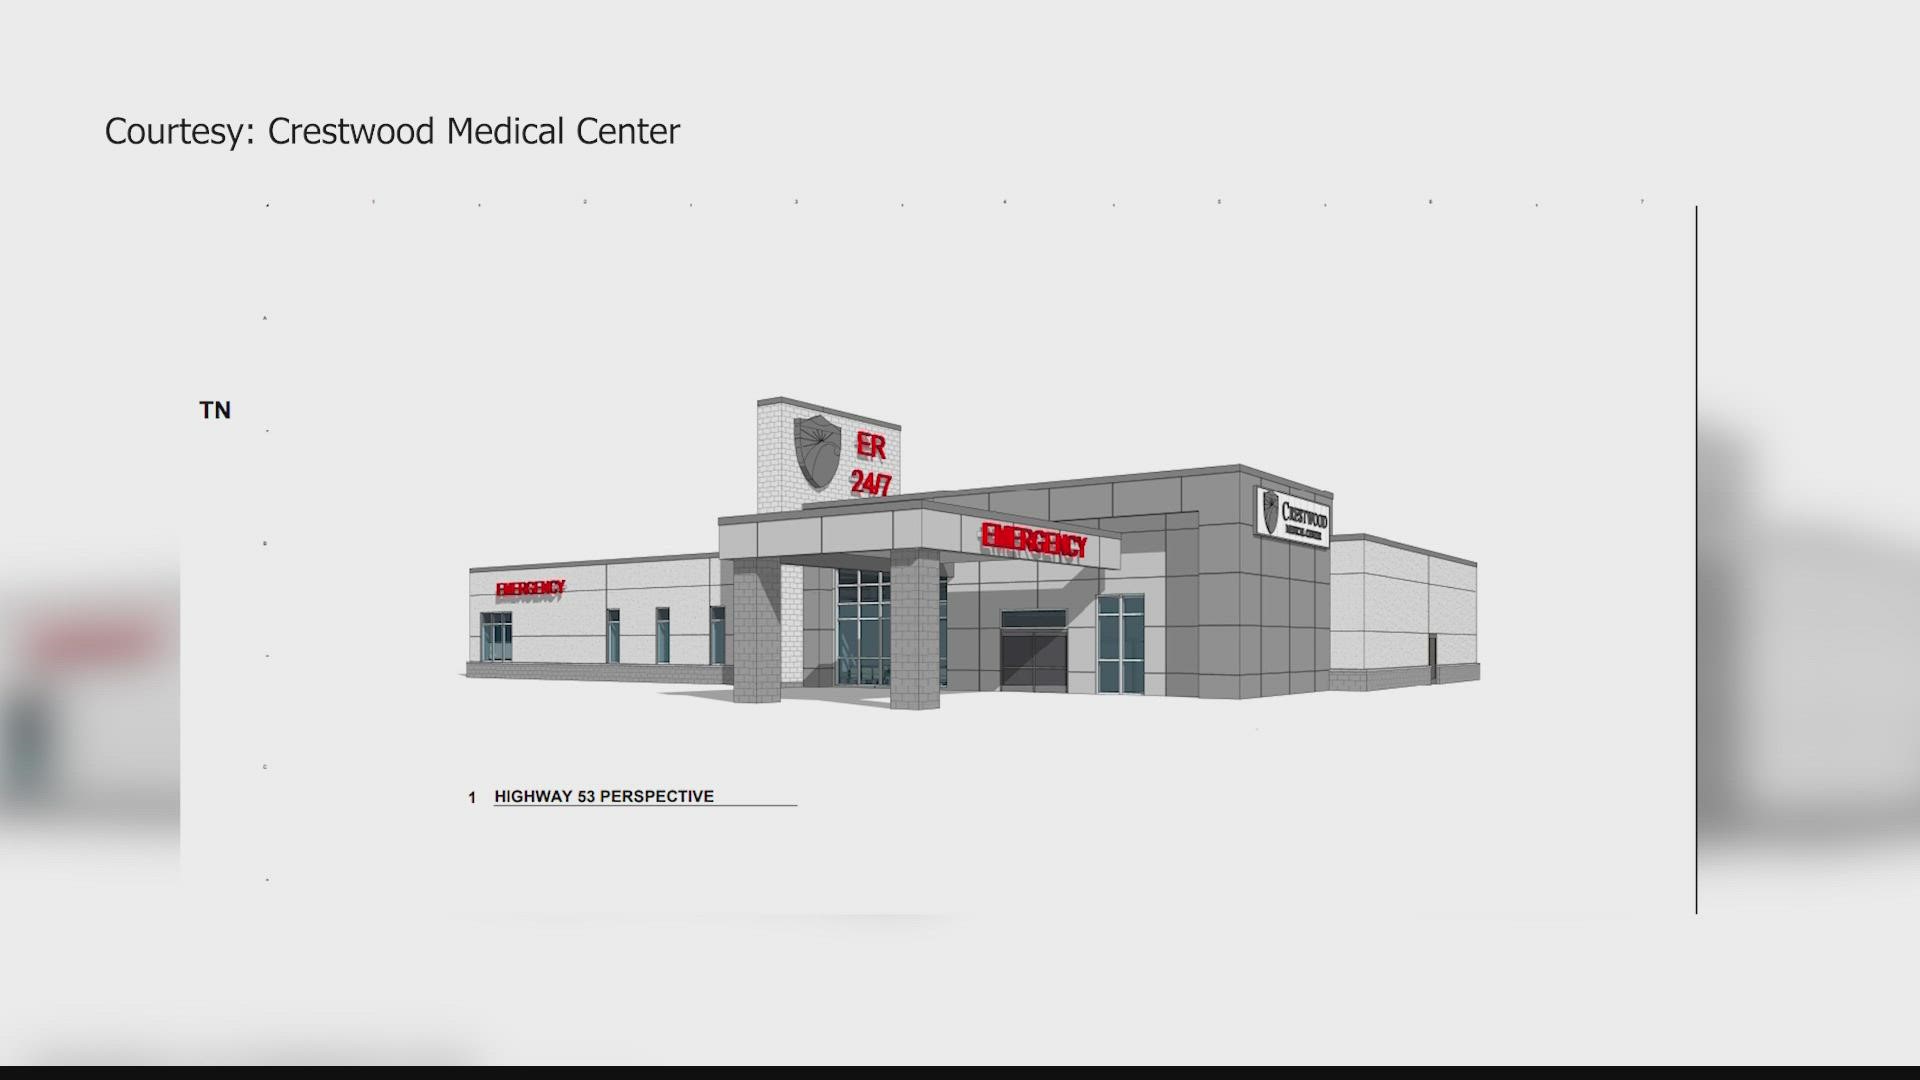 Crestwood Medical Center opening a stand-alone 24/7 emergency room in Harvest.